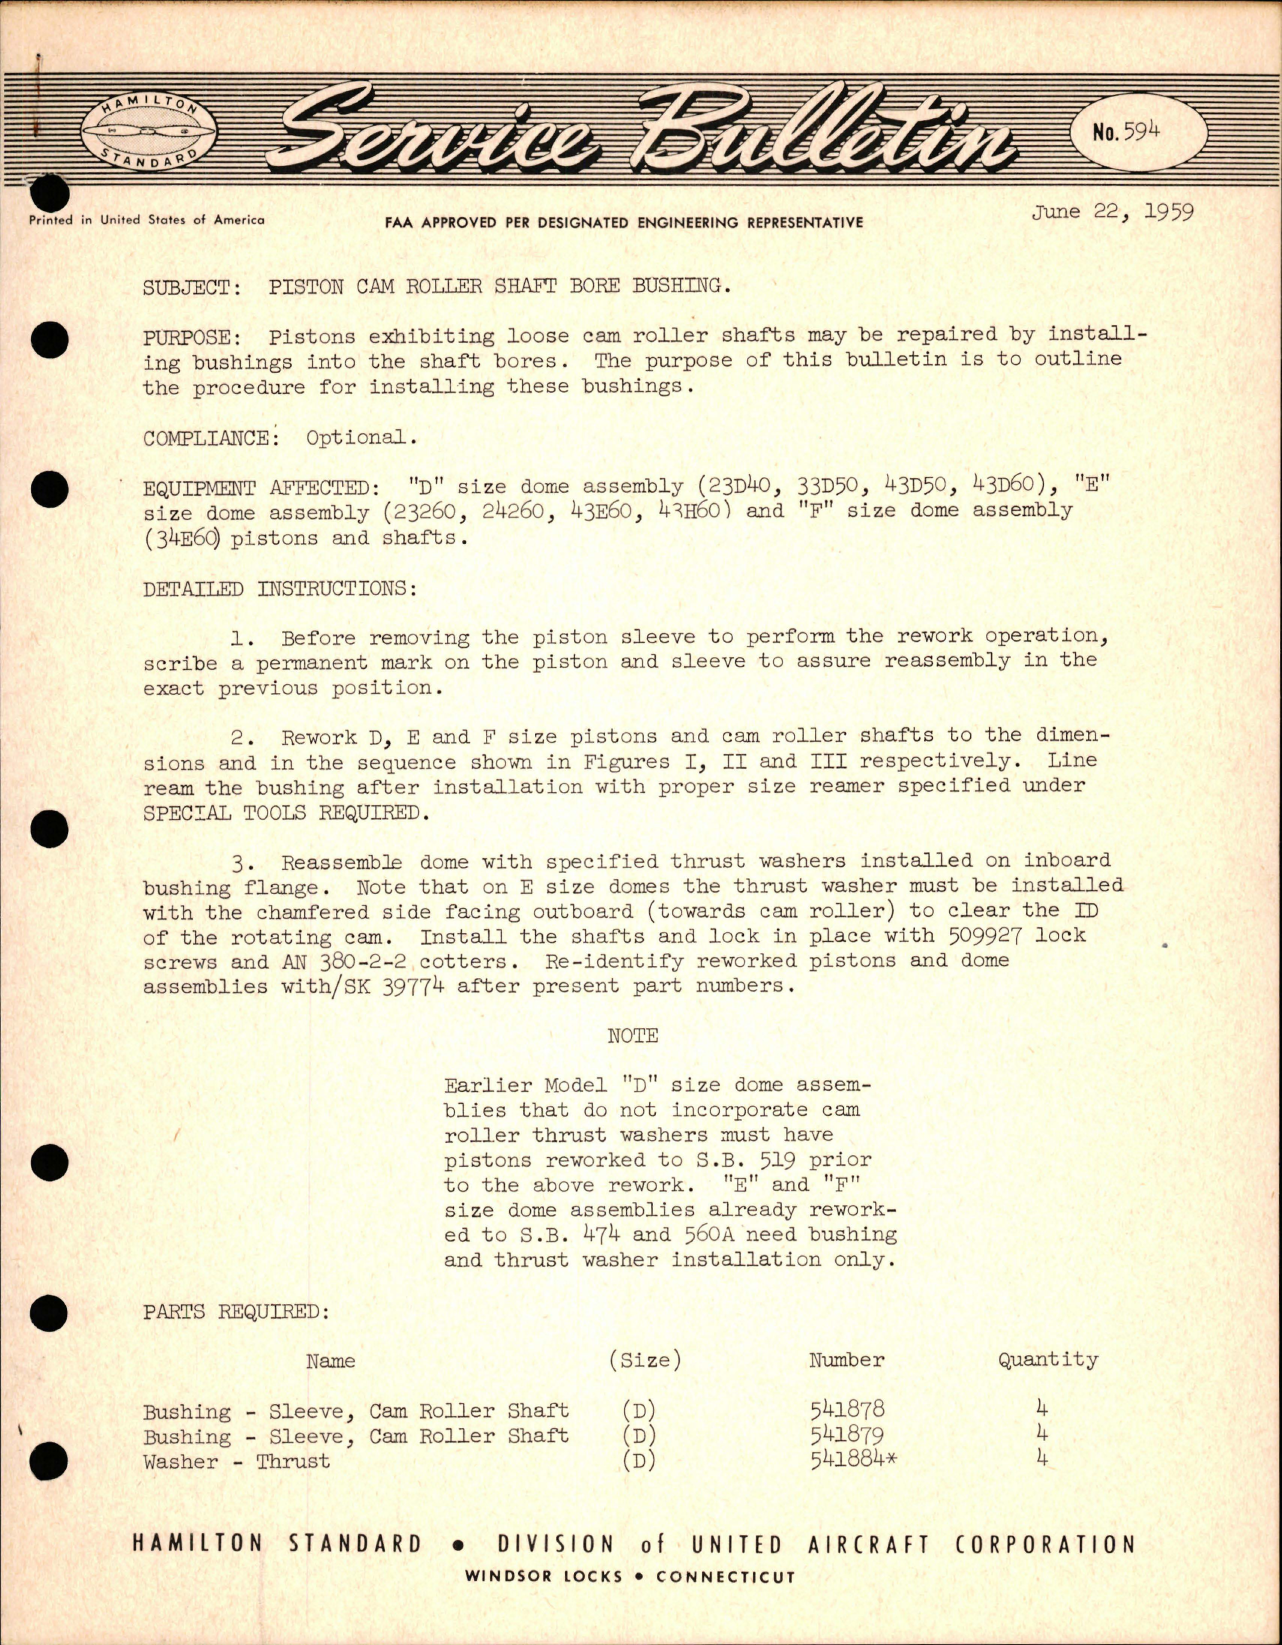 Sample page 1 from AirCorps Library document: Piston Cam Roller Shaft Bore Bushing